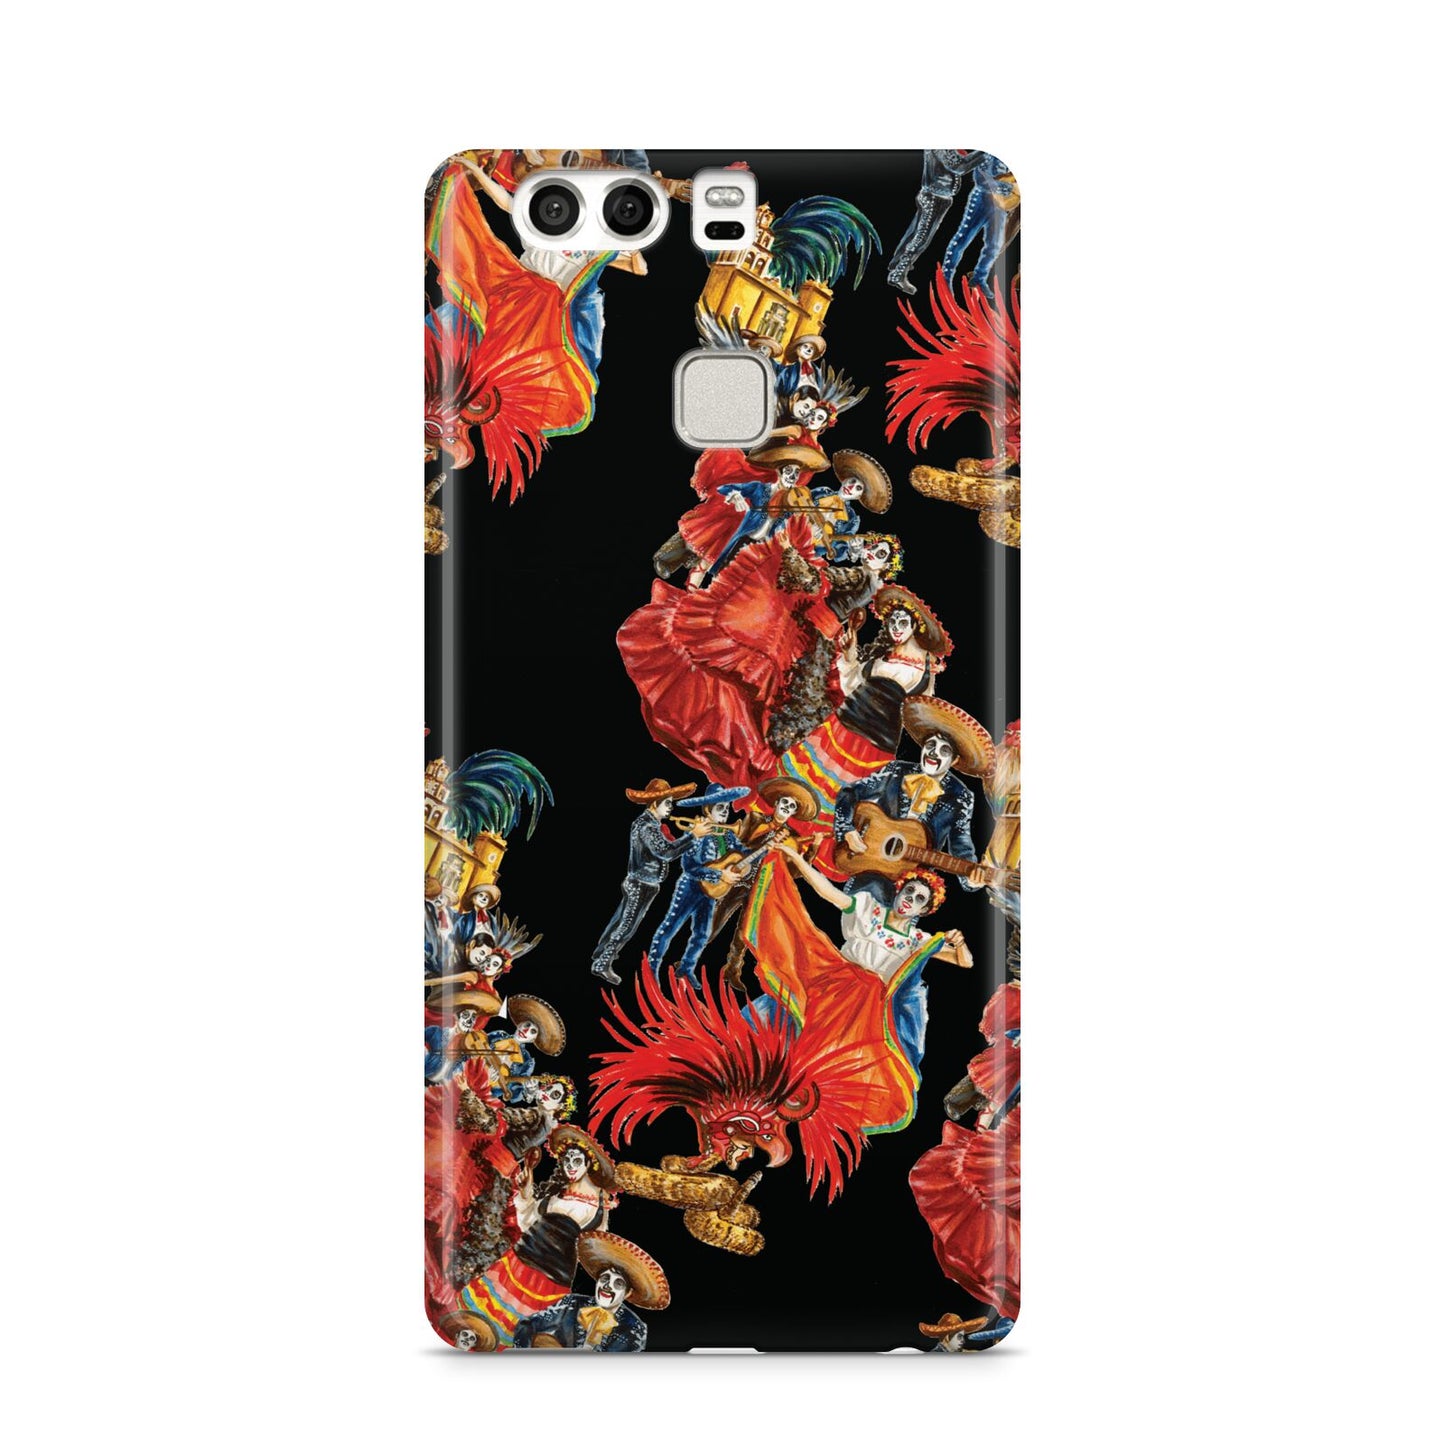 Day of the Dead Festival Huawei P9 Case